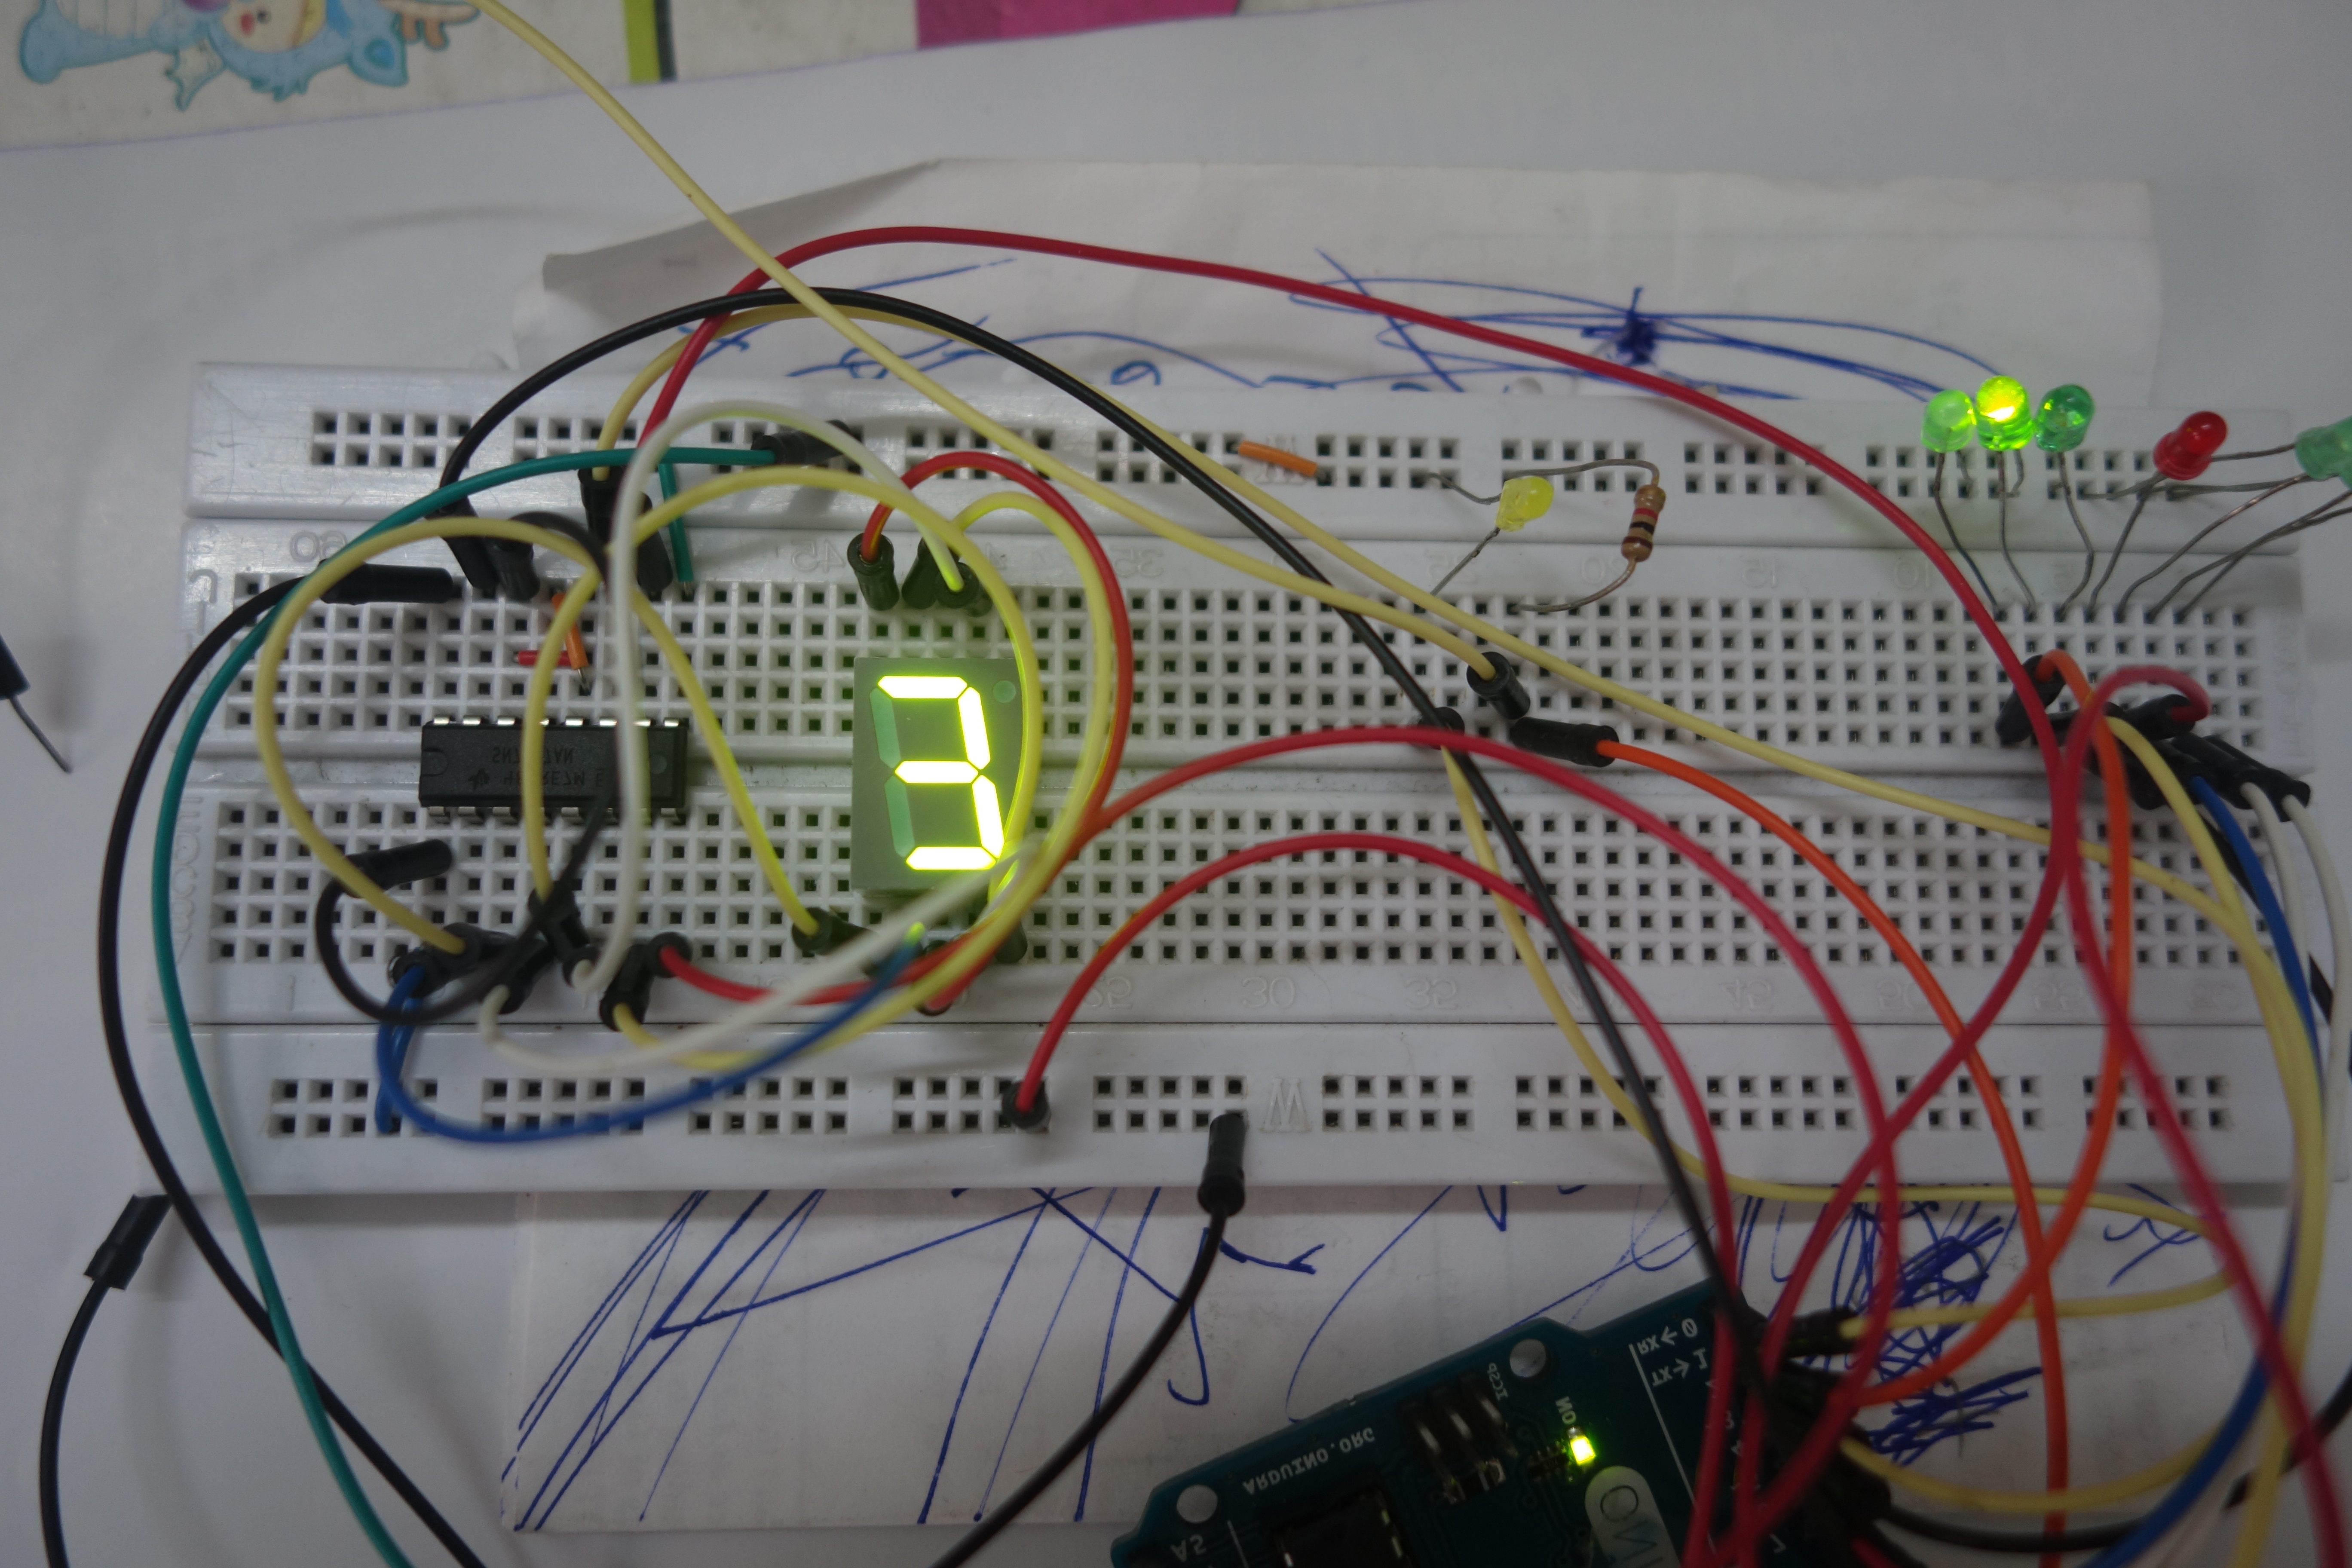 Simple Arduino Projects for You